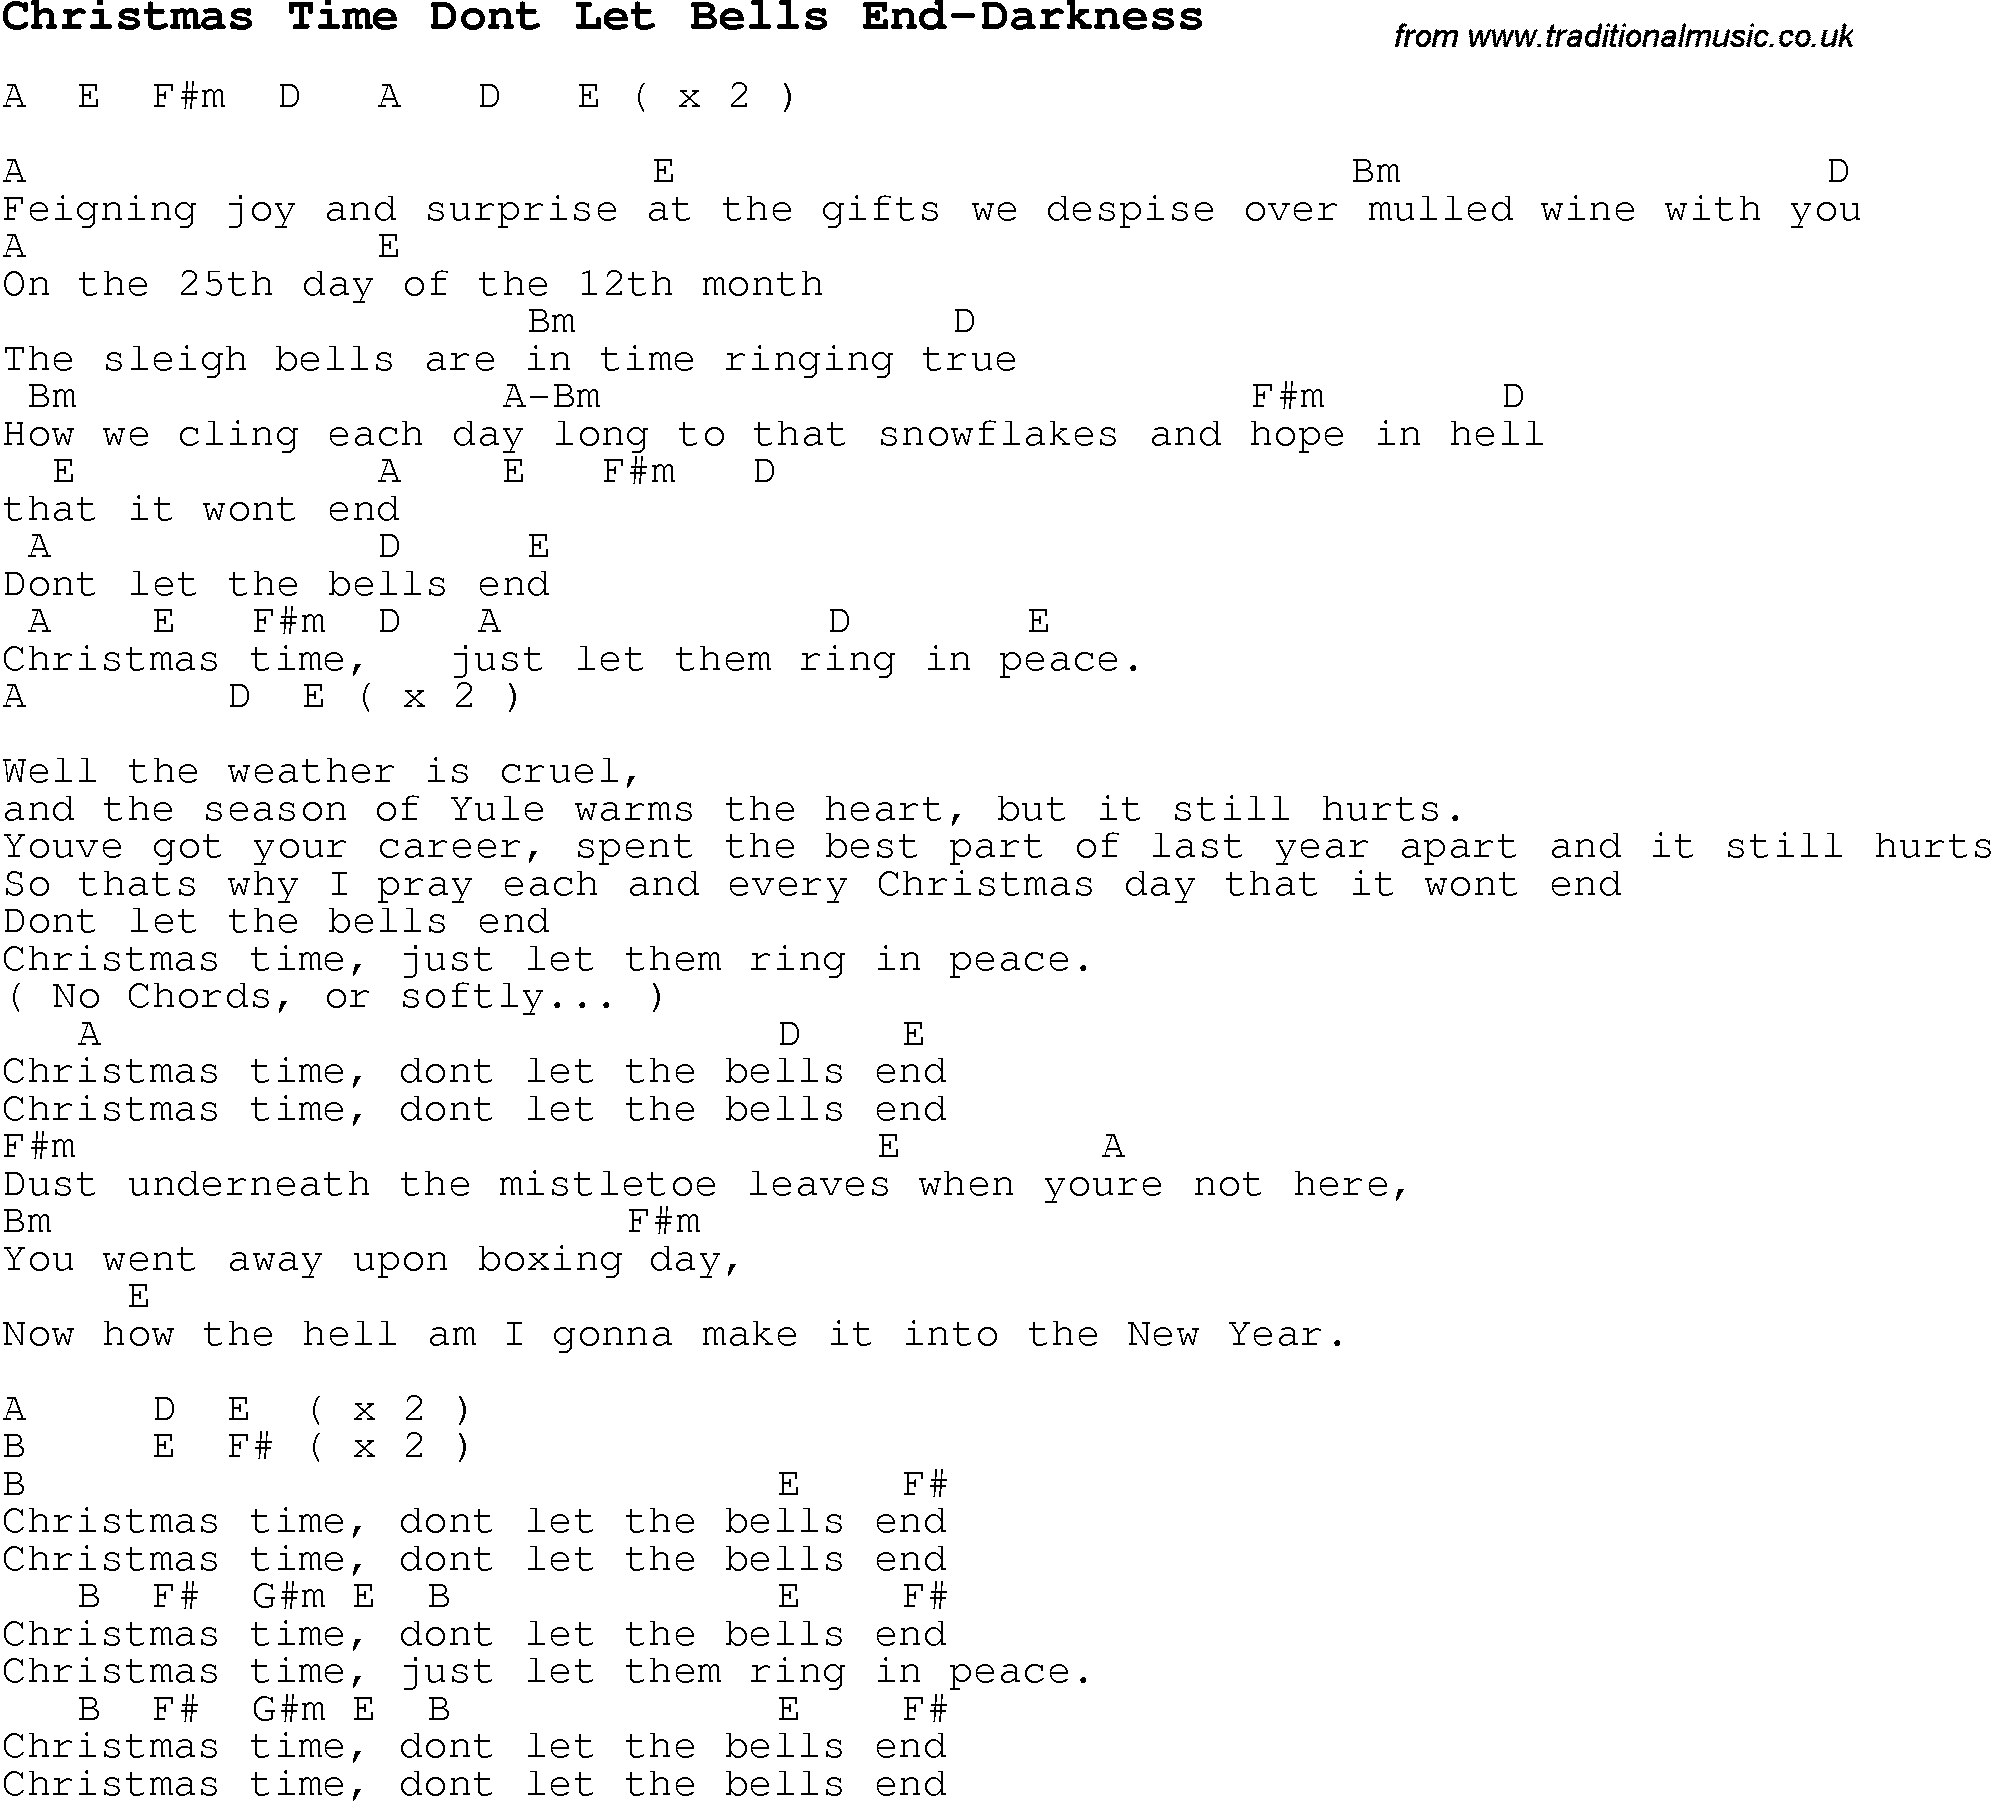 Christmas Carol/Song lyrics with chords for Christmas Time Dont Let Bells End-Darkness